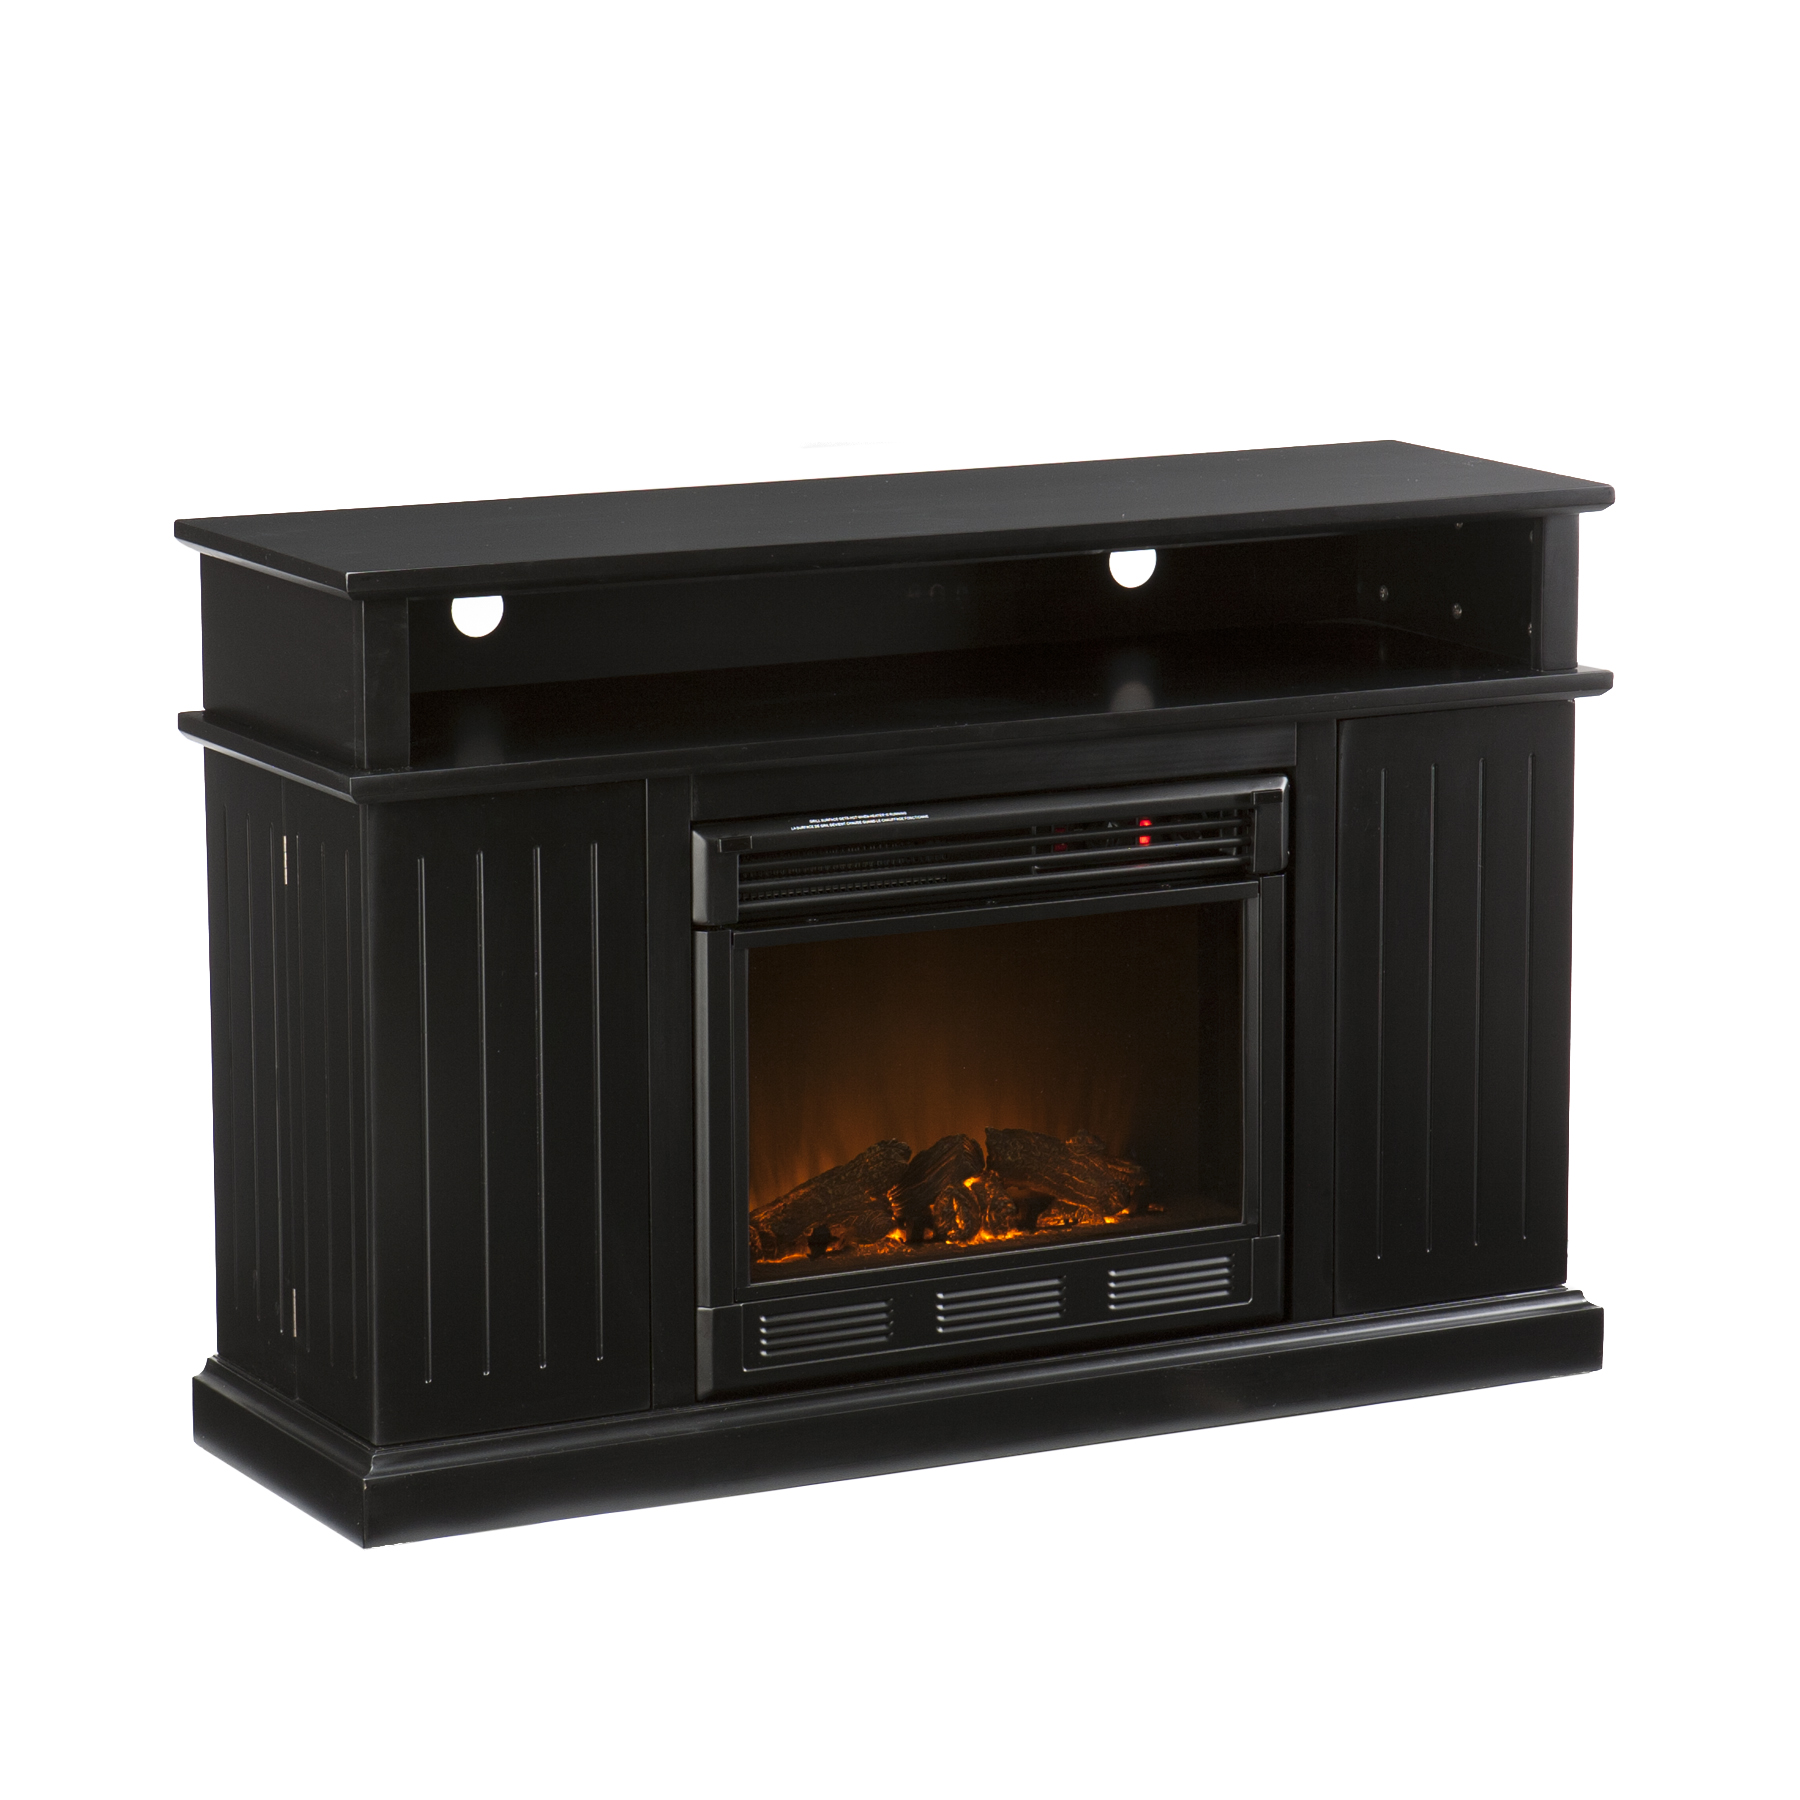 If you are seeking a fireplace that has it all